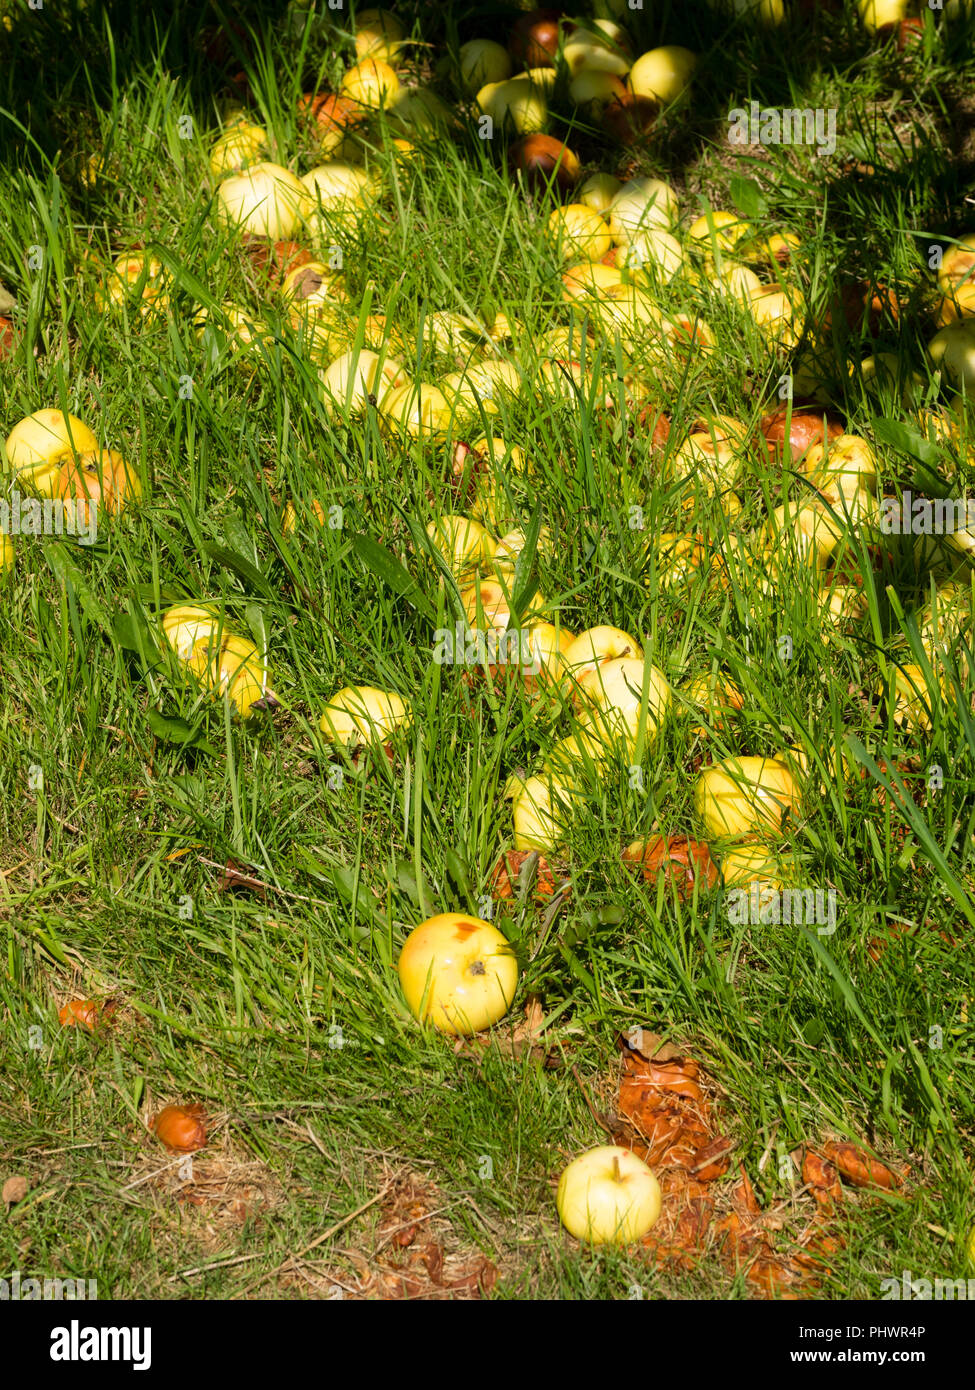 Windfall fruit of the old Cornish heritage cooking and dessert apple, Malus domestica 'Manaccan Primrose' Stock Photo